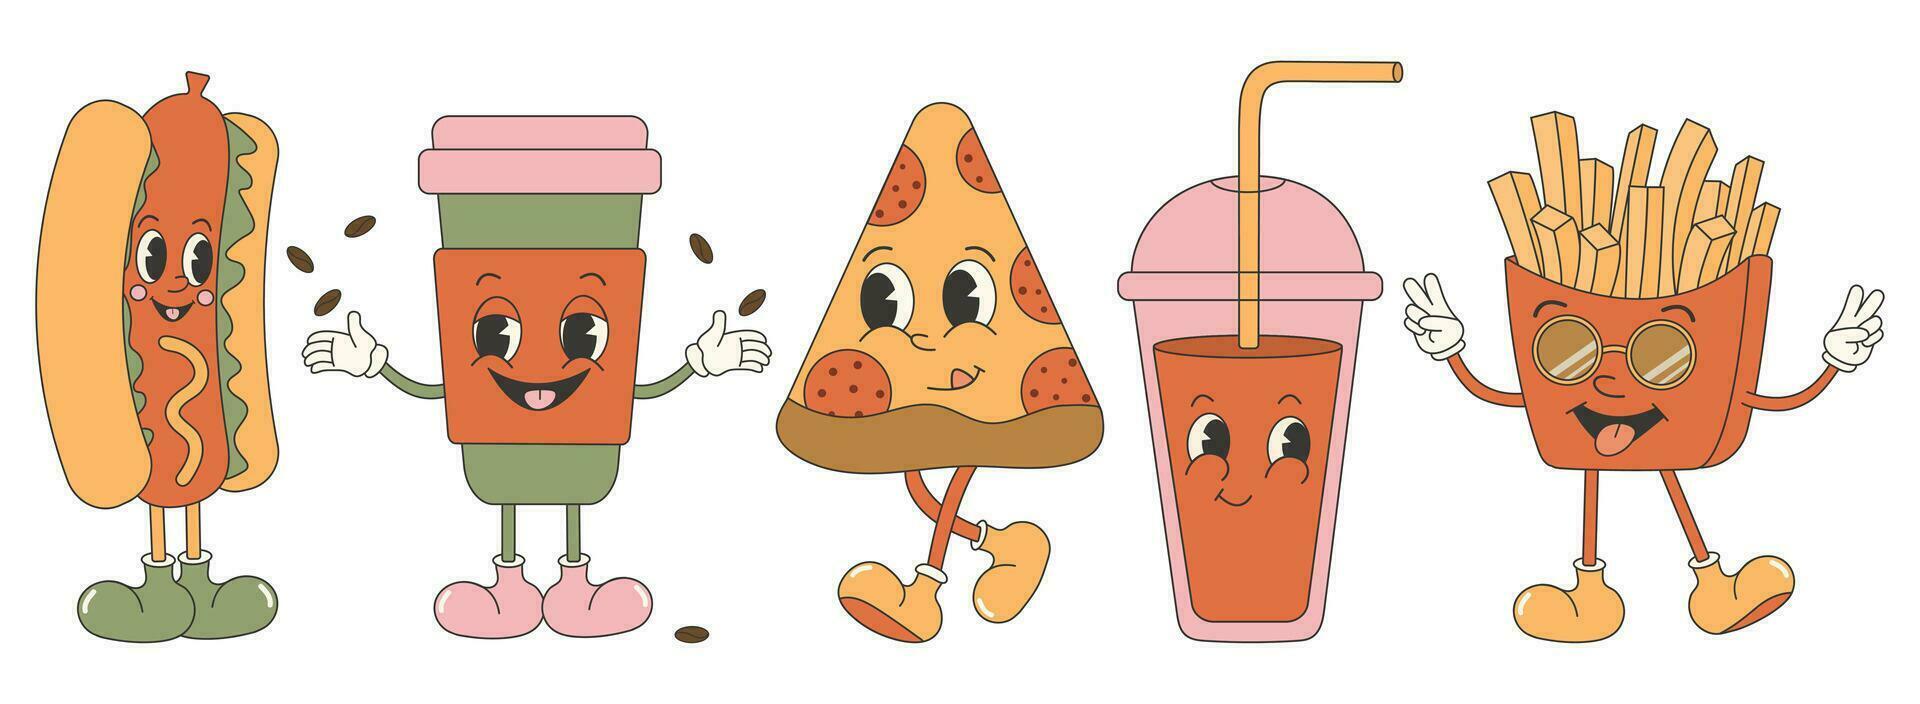 Trendy groovy fast food sticker set. Retro vintage vector set with cute and funny characters. Hot dog, coffee, soda, french fries, pizza.